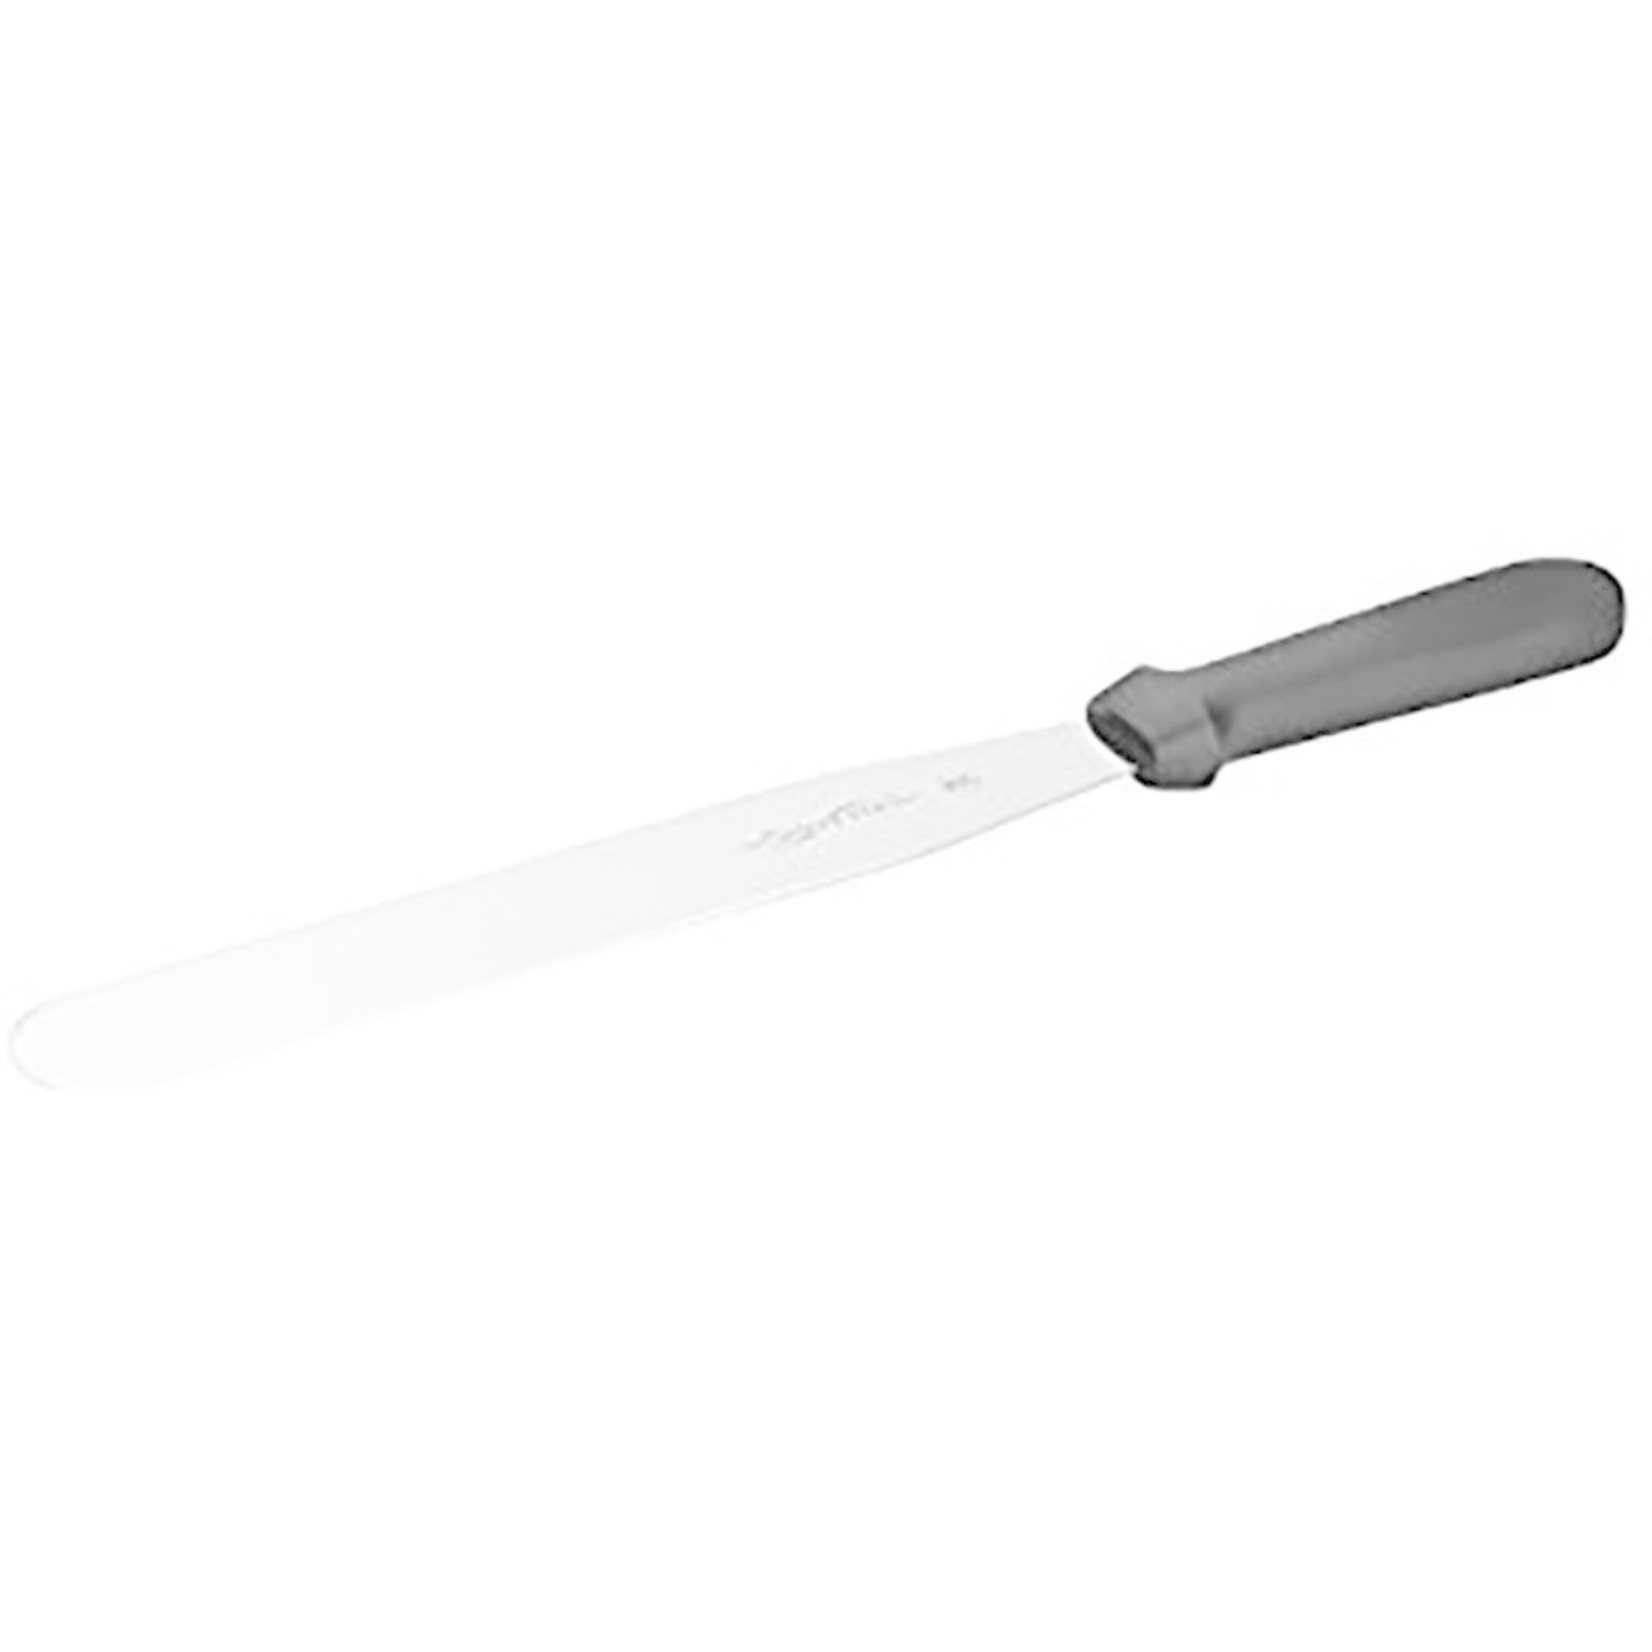 Ateco Bench Dough Scraper, Stainless Steel with Black Handle